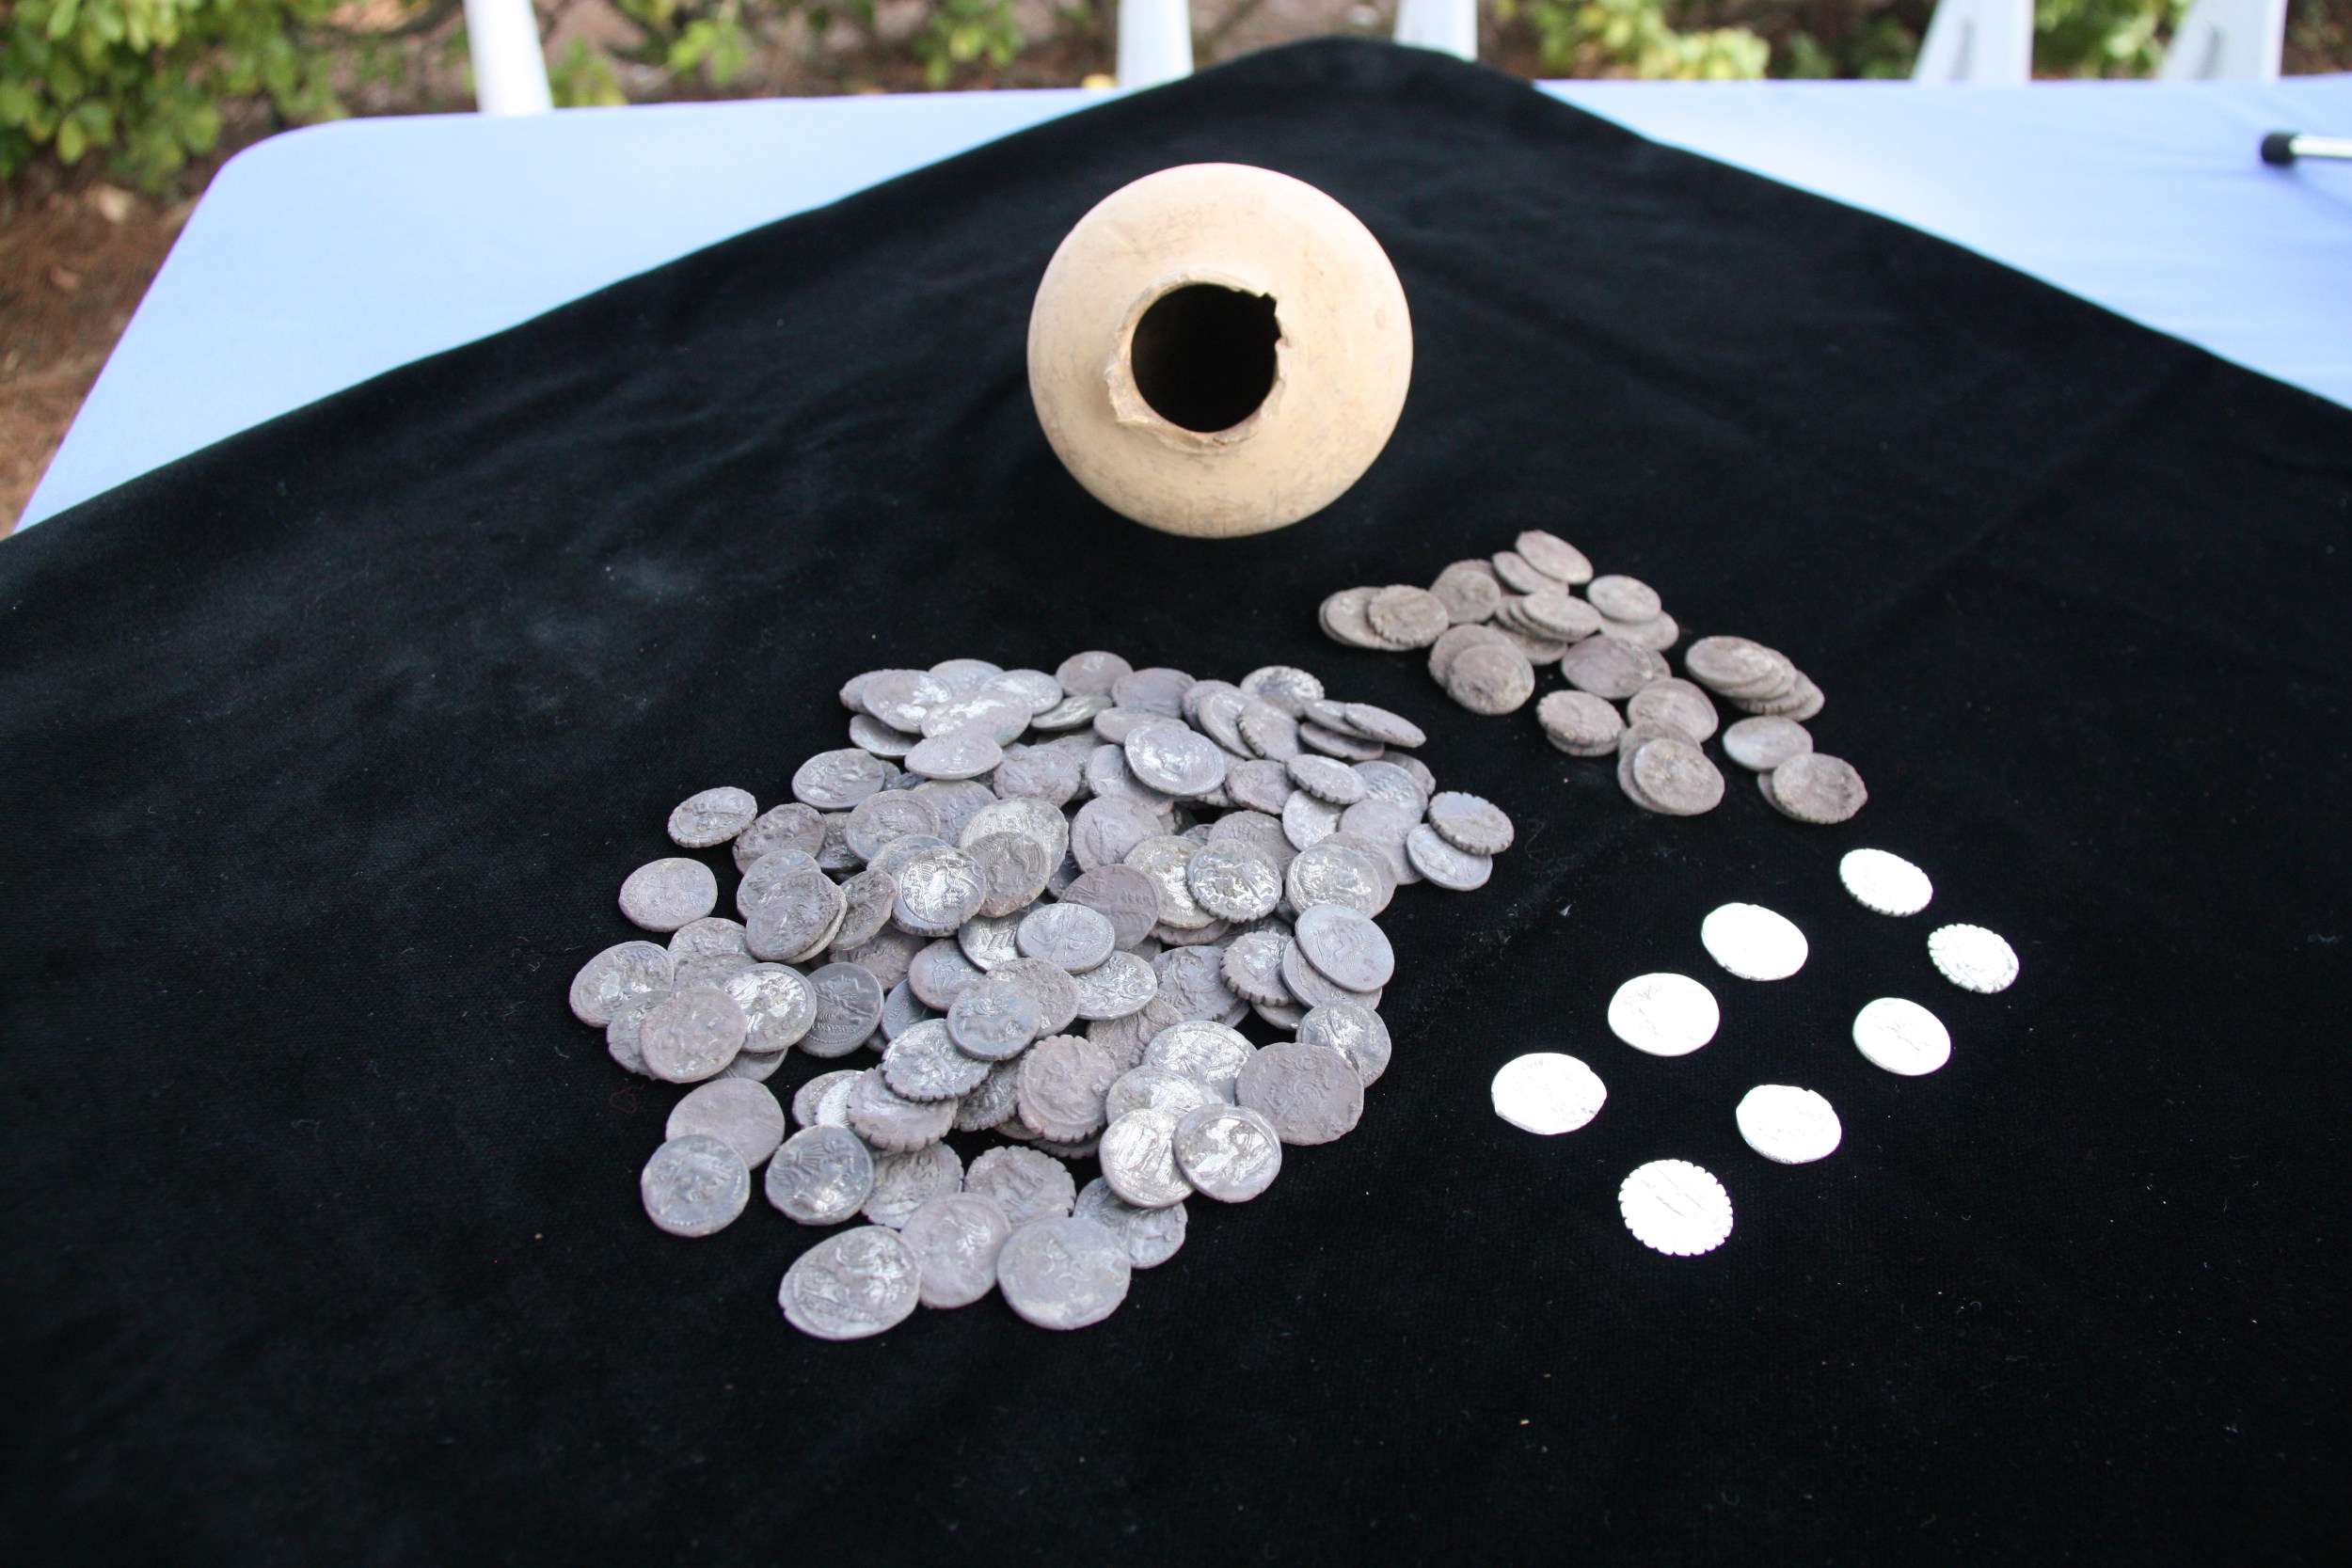 A ceramic-vase containing 200 silver denarius, dating from the 1st century B.C, was found in the Roman site of Empúries (by ACN)